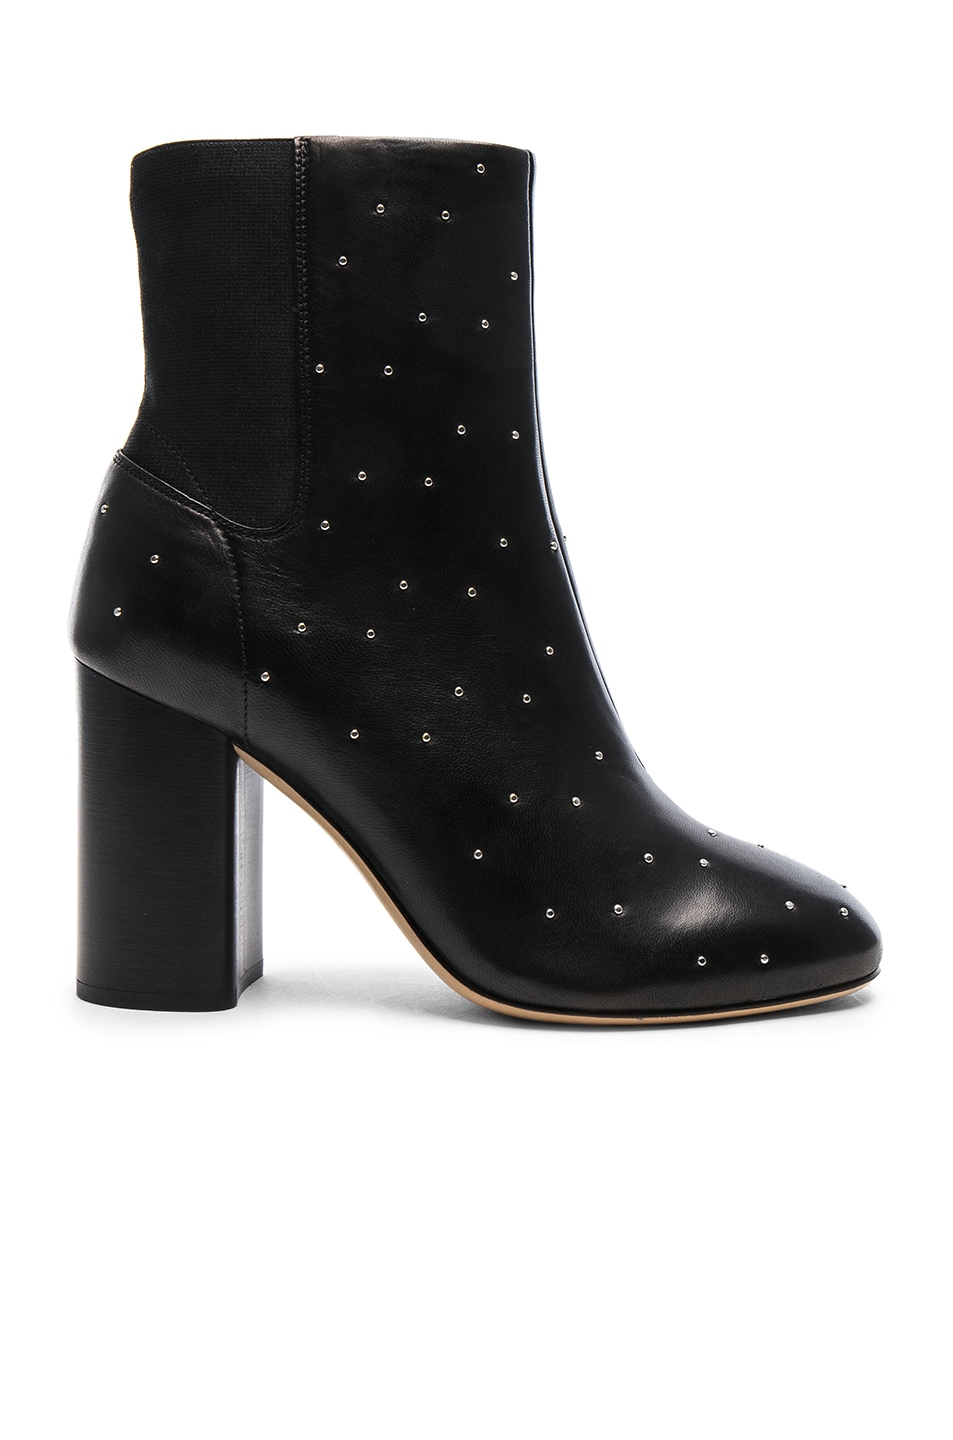 Image 1 of Rag & Bone Leather Agnes Boots in Black Stud